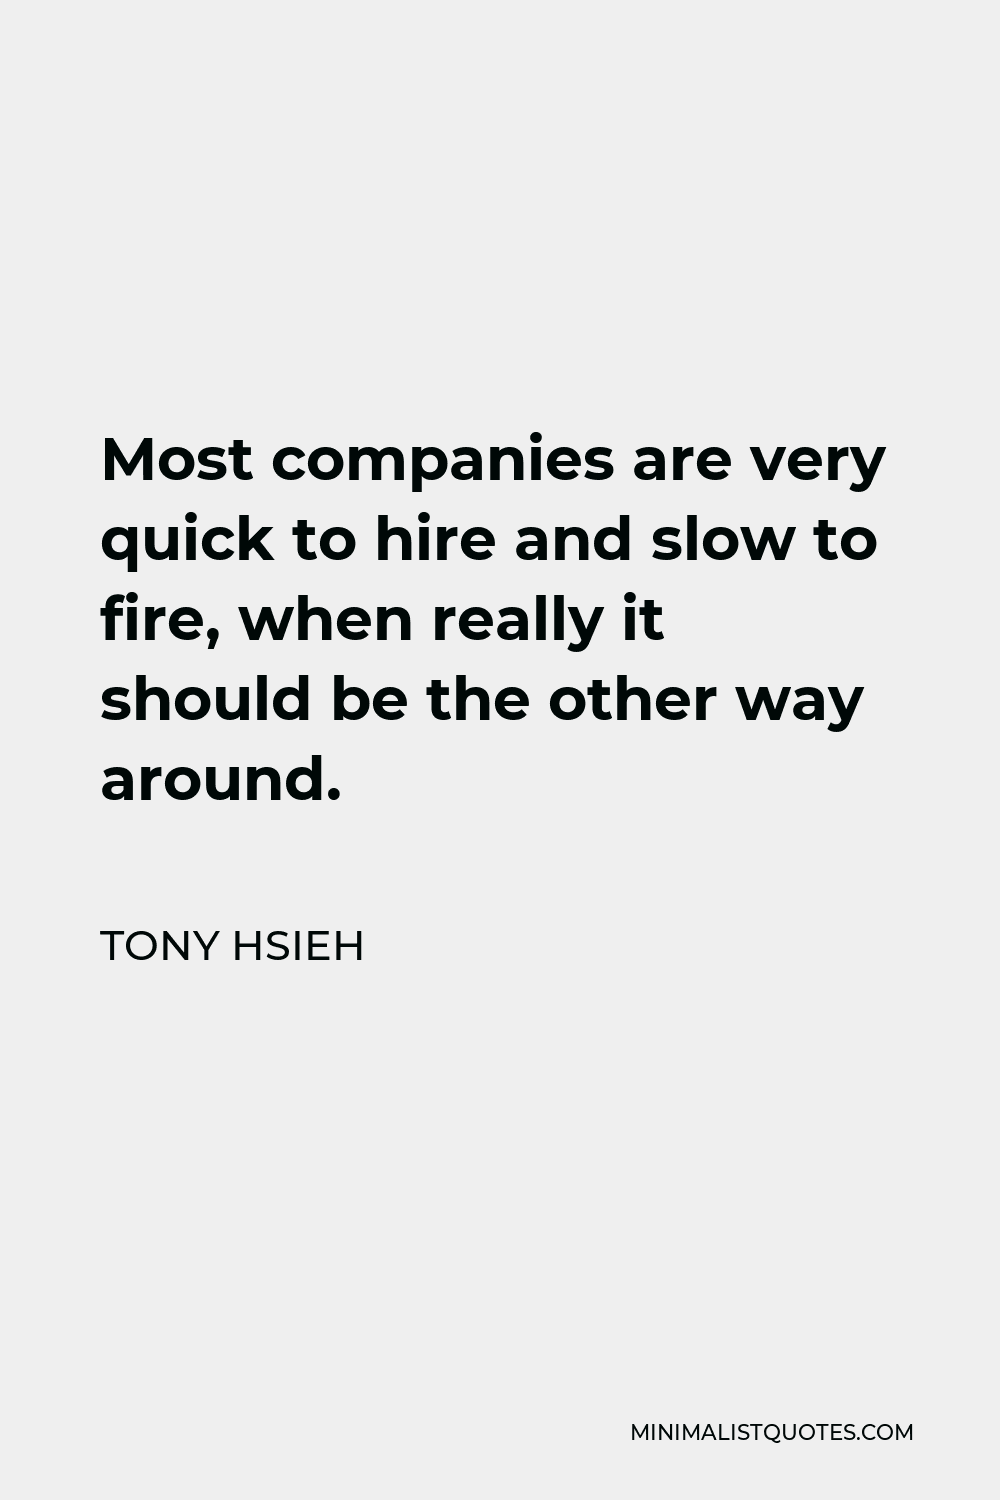 Tony Hsieh Quote - Most companies are very quick to hire and slow to fire, when really it should be the other way around.